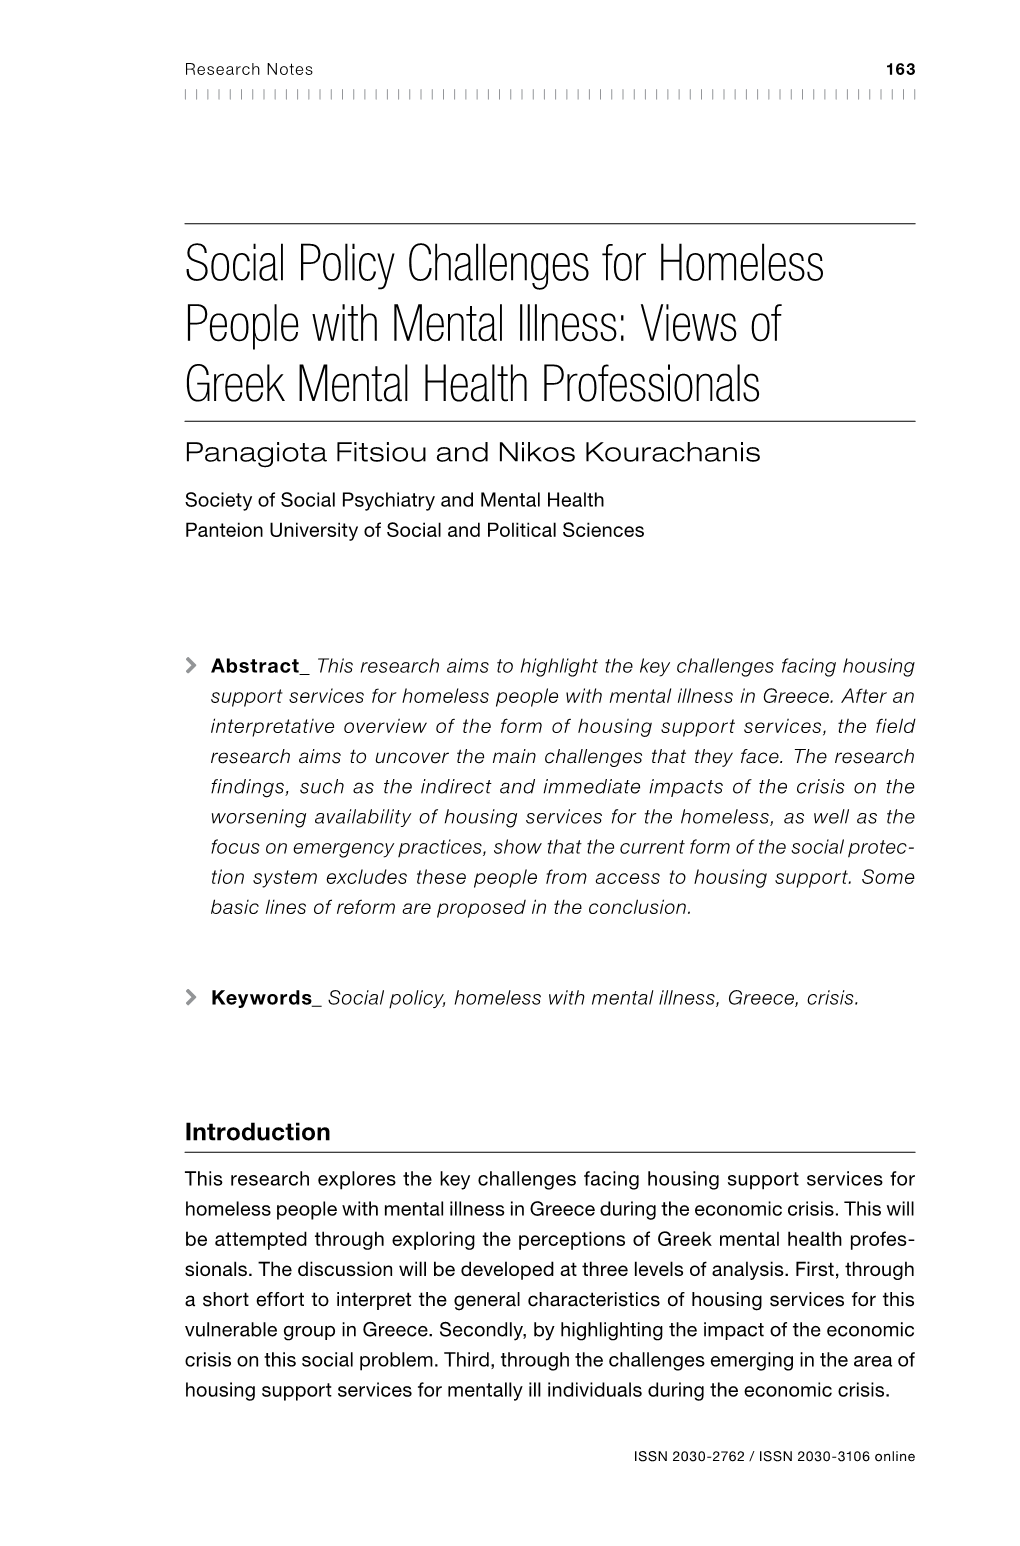 Social Policy Challenges for Homeless People with Mental Illness: Views of Greek Mental Health Professionals Panagiota Fitsiou and Nikos Kourachanis